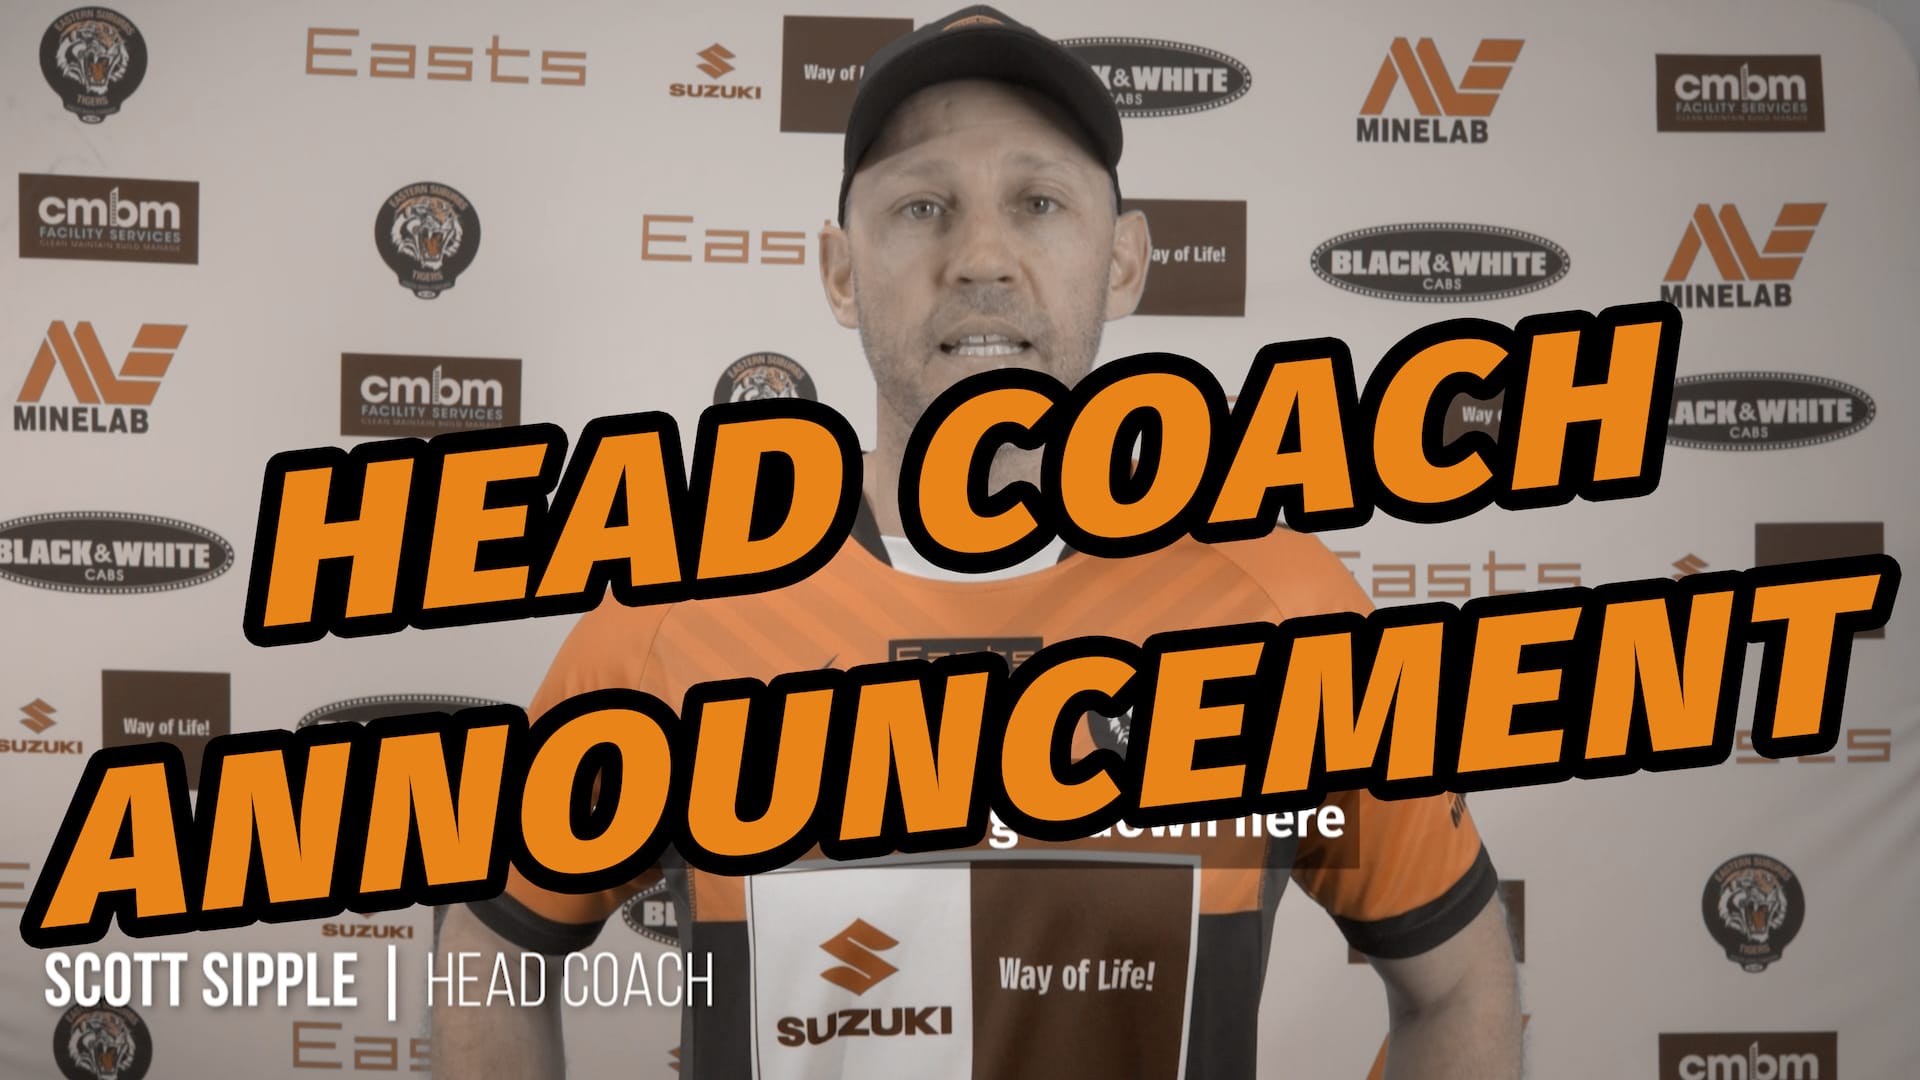 Head Coach of the Might Easts Tigers, Scott Sipple comes by TigerTV to bring news on the final home games for a few of our players for season 2019.